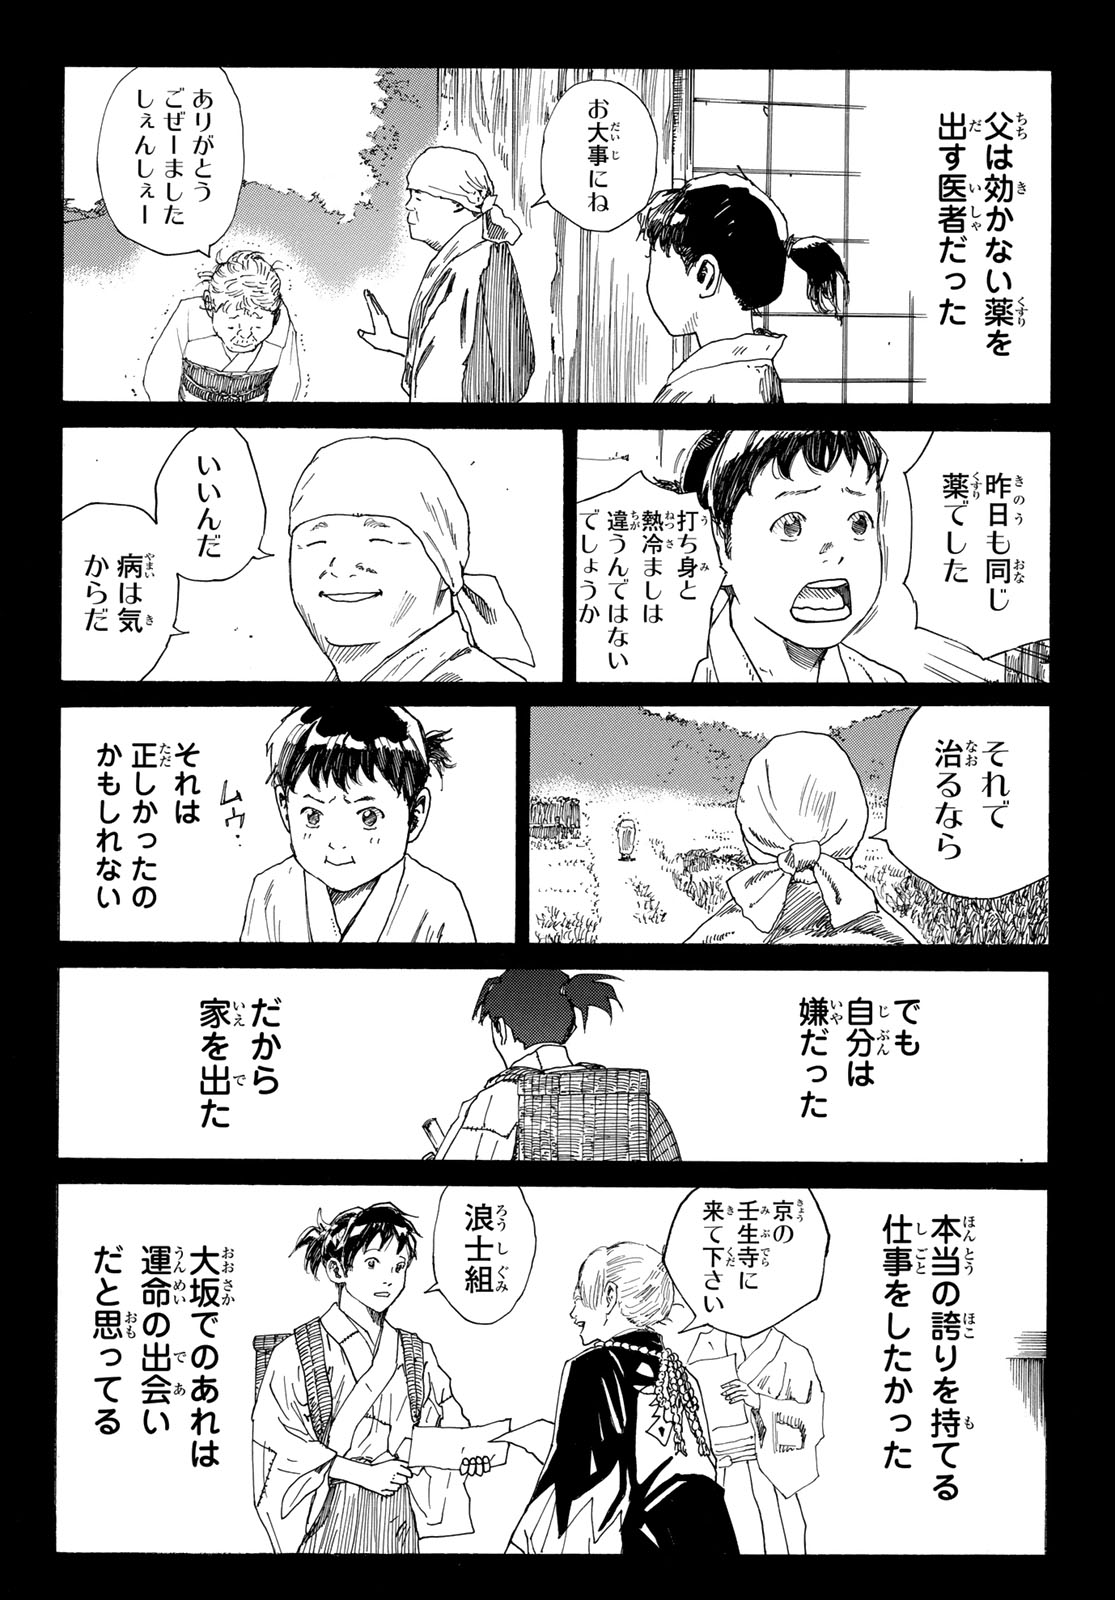 An Mo Miburo 第130話 - Page 14